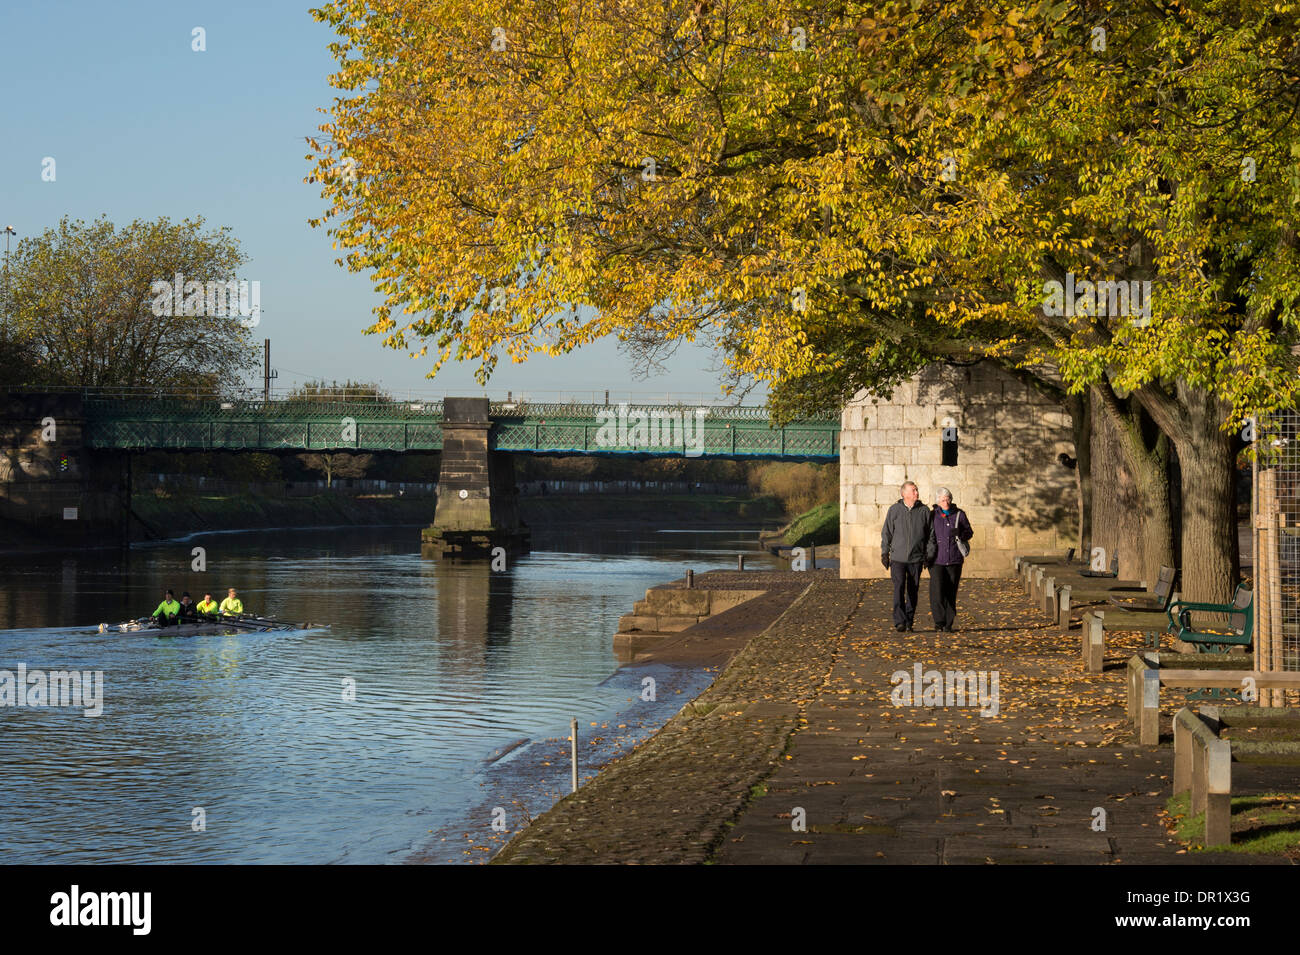 Rowers in boat & couple walking - quiet, scenic, sunlit, tree-lined riverside footpath in autumn - River Ouse, Dame Judi Dench Walk, York, England, UK Stock Photo